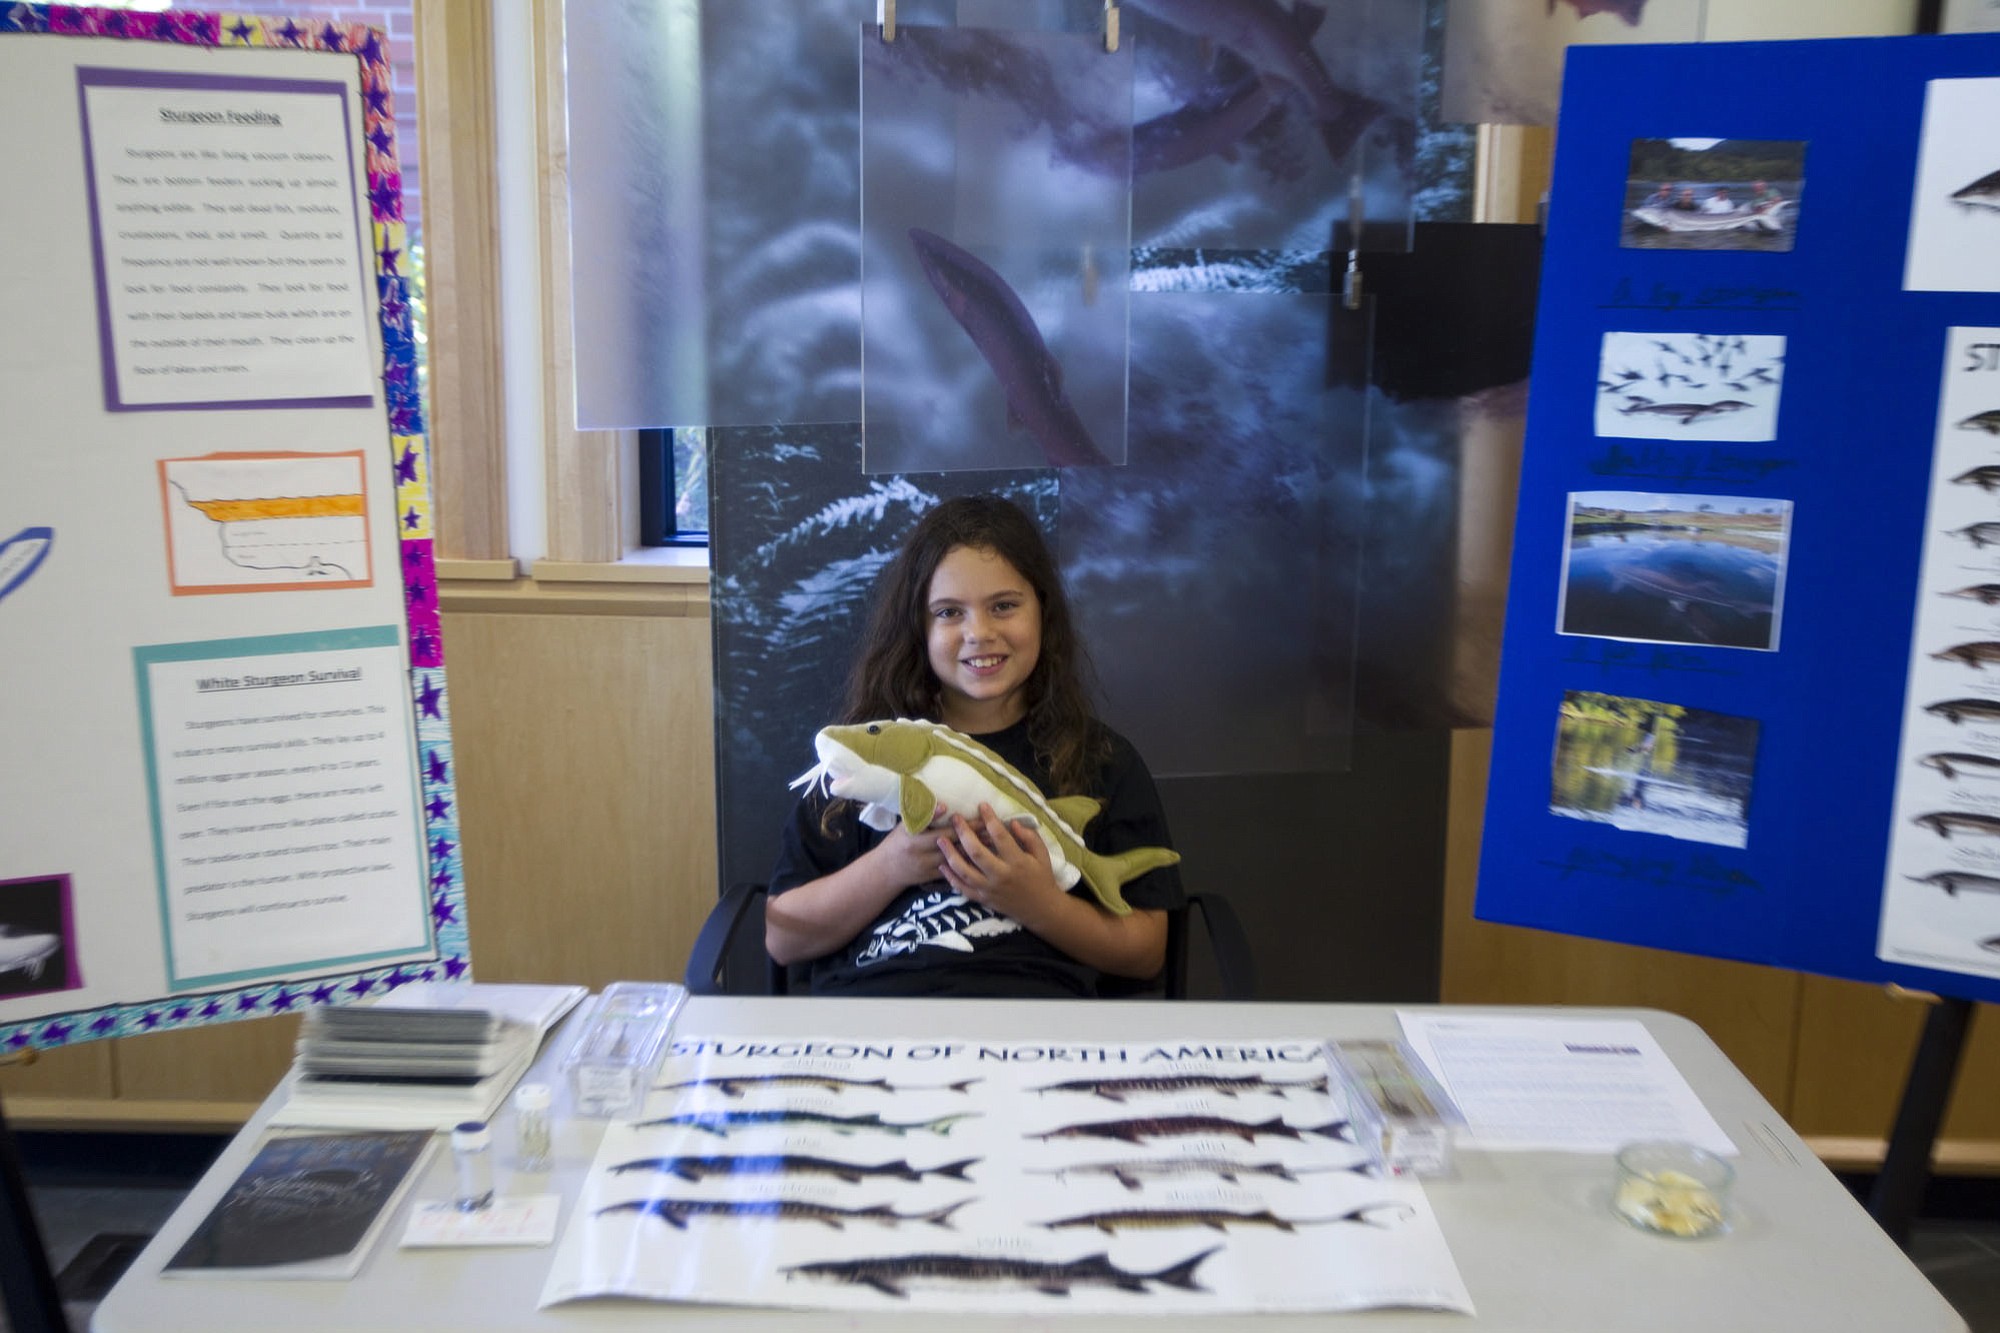 Sylvia Kern, a fifth grader from Seattle, came to Vancouver just to show off her ongoing, growing science-project displays abour sturgeons during the Water Resources Education Center's 18th annual Sturgeon Festival. Why?